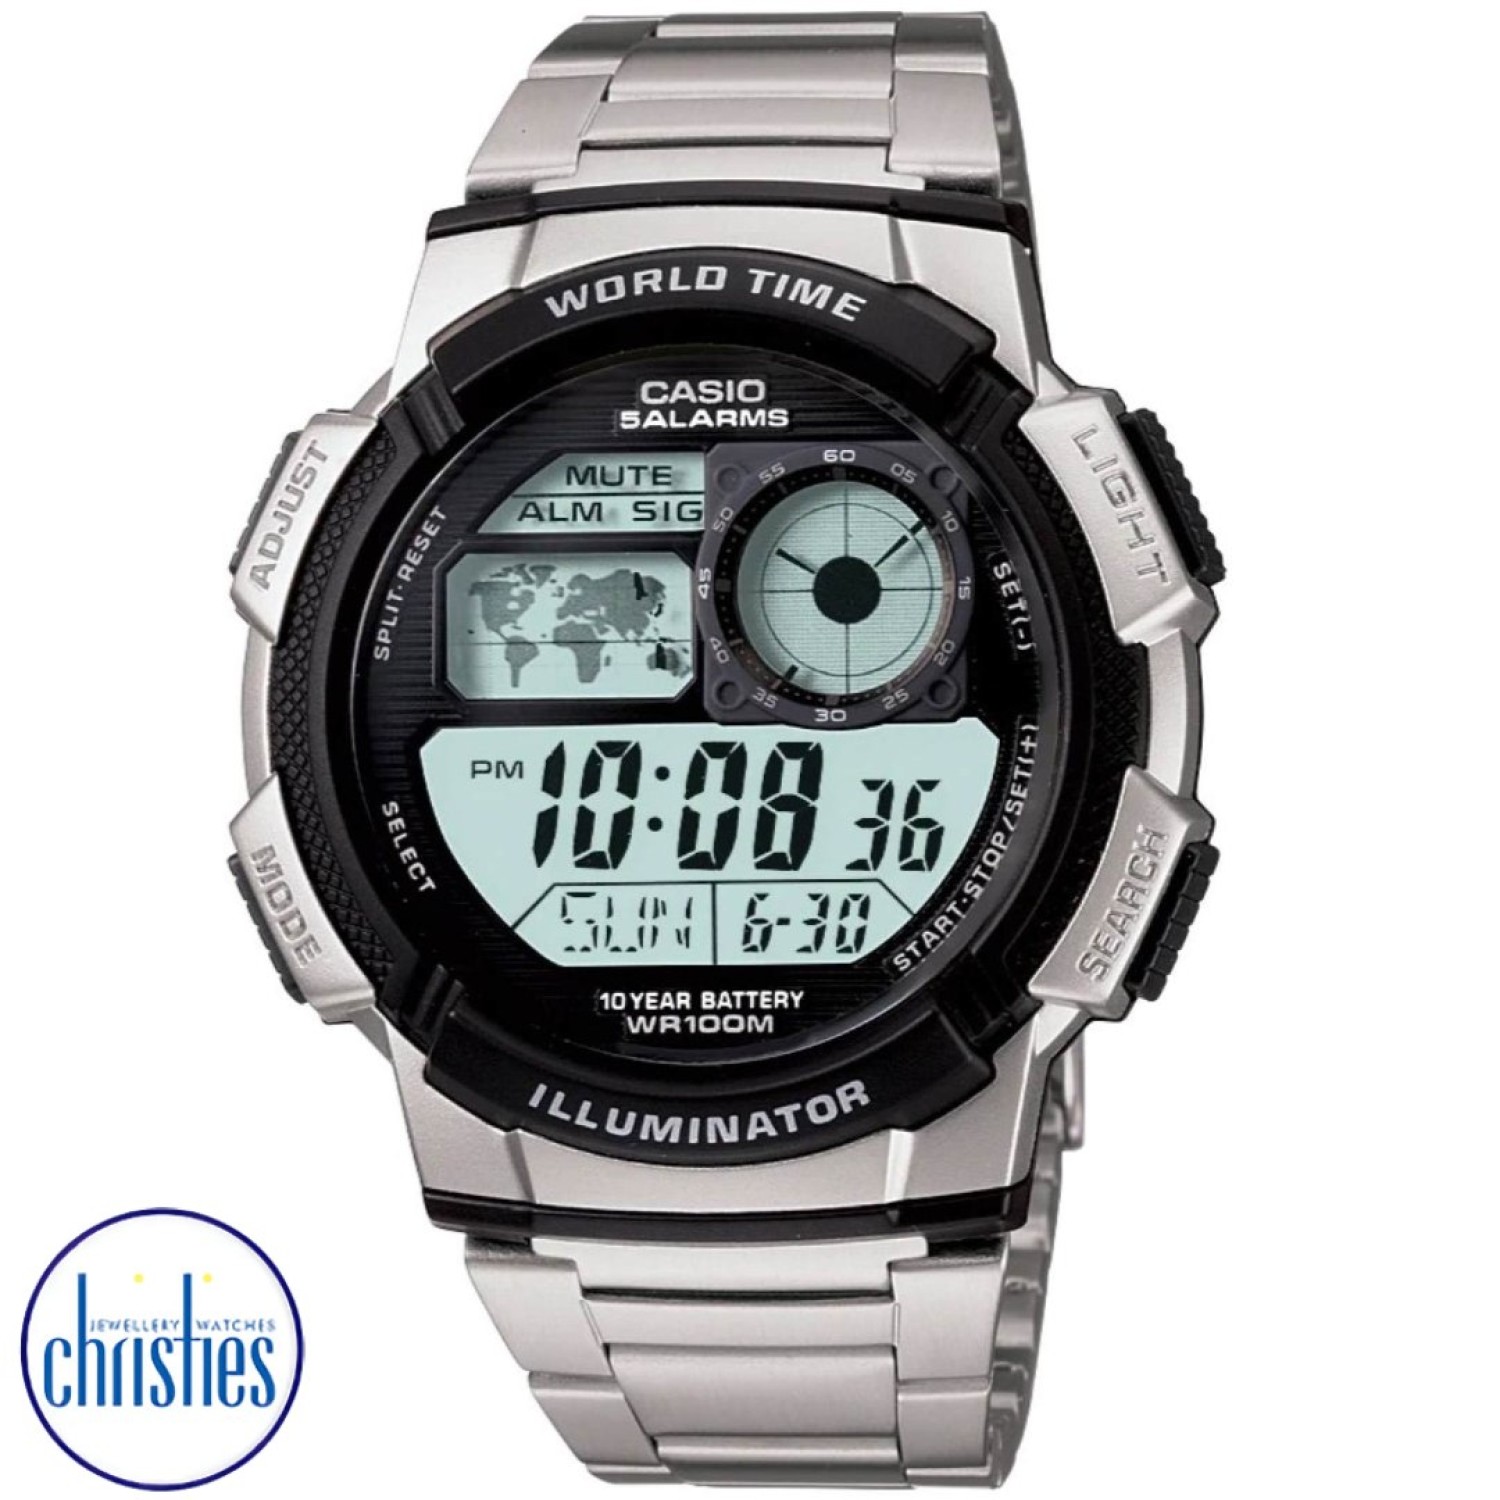 AE1000WD-1A Casio Multi Alarm Watch. Humm -Buy Little things up to $1000 and choose 10 weekly or 5 fortnightly payments with no interest. Late payment fee of $10 will apply. 2 Year Casio Guarantee which is only available at authorised New Zeala @christies